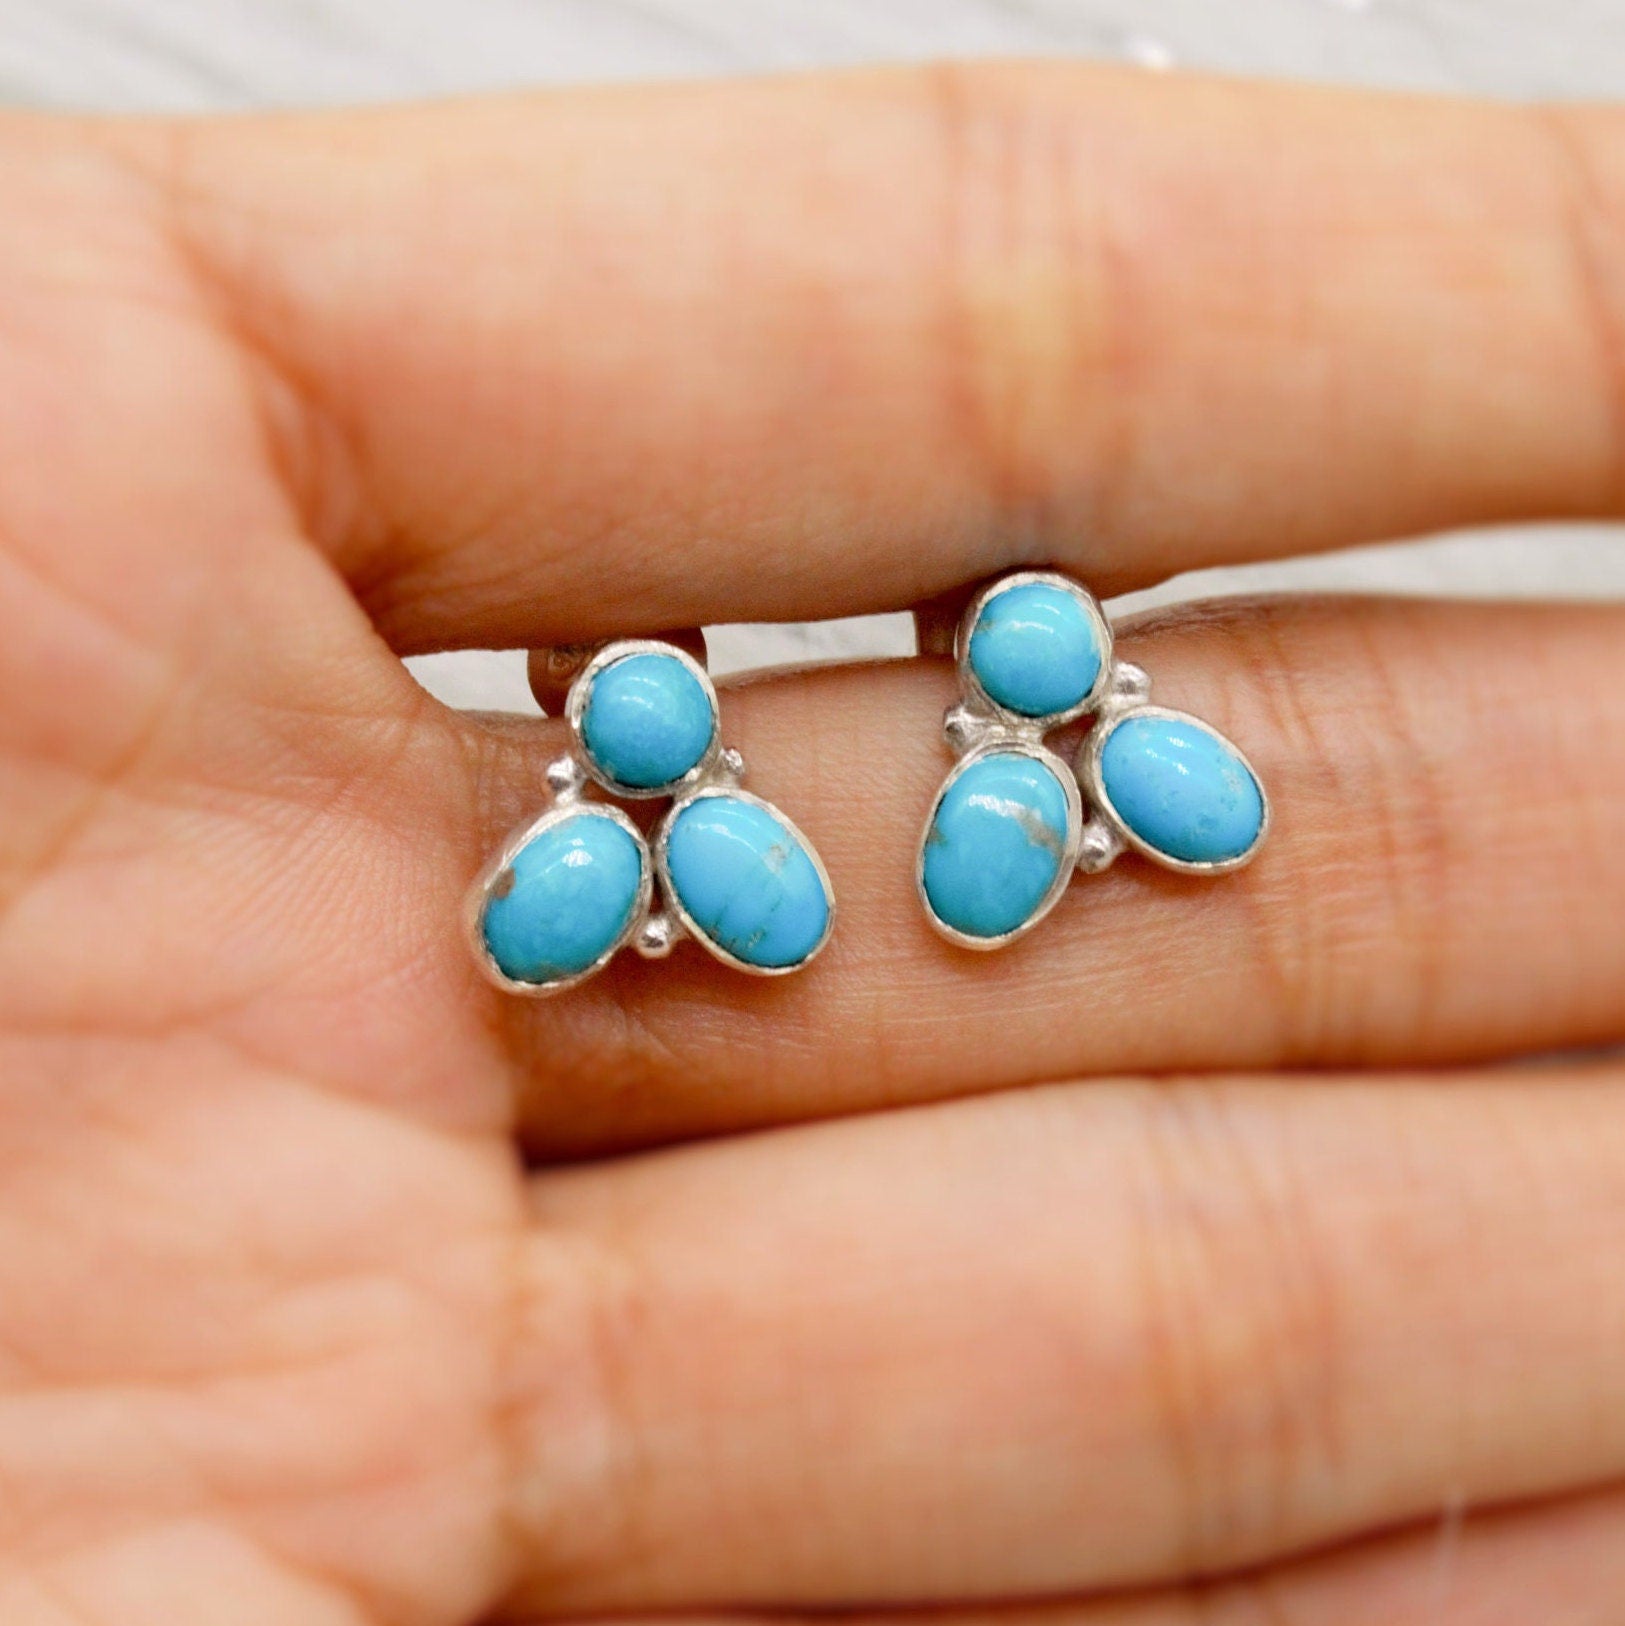 Turquoise Silver Stud Earrings Set, 925 Silver Studs, Turquoise Jewelry, December Birthstone, Gemstone Studs, Gifts For Her